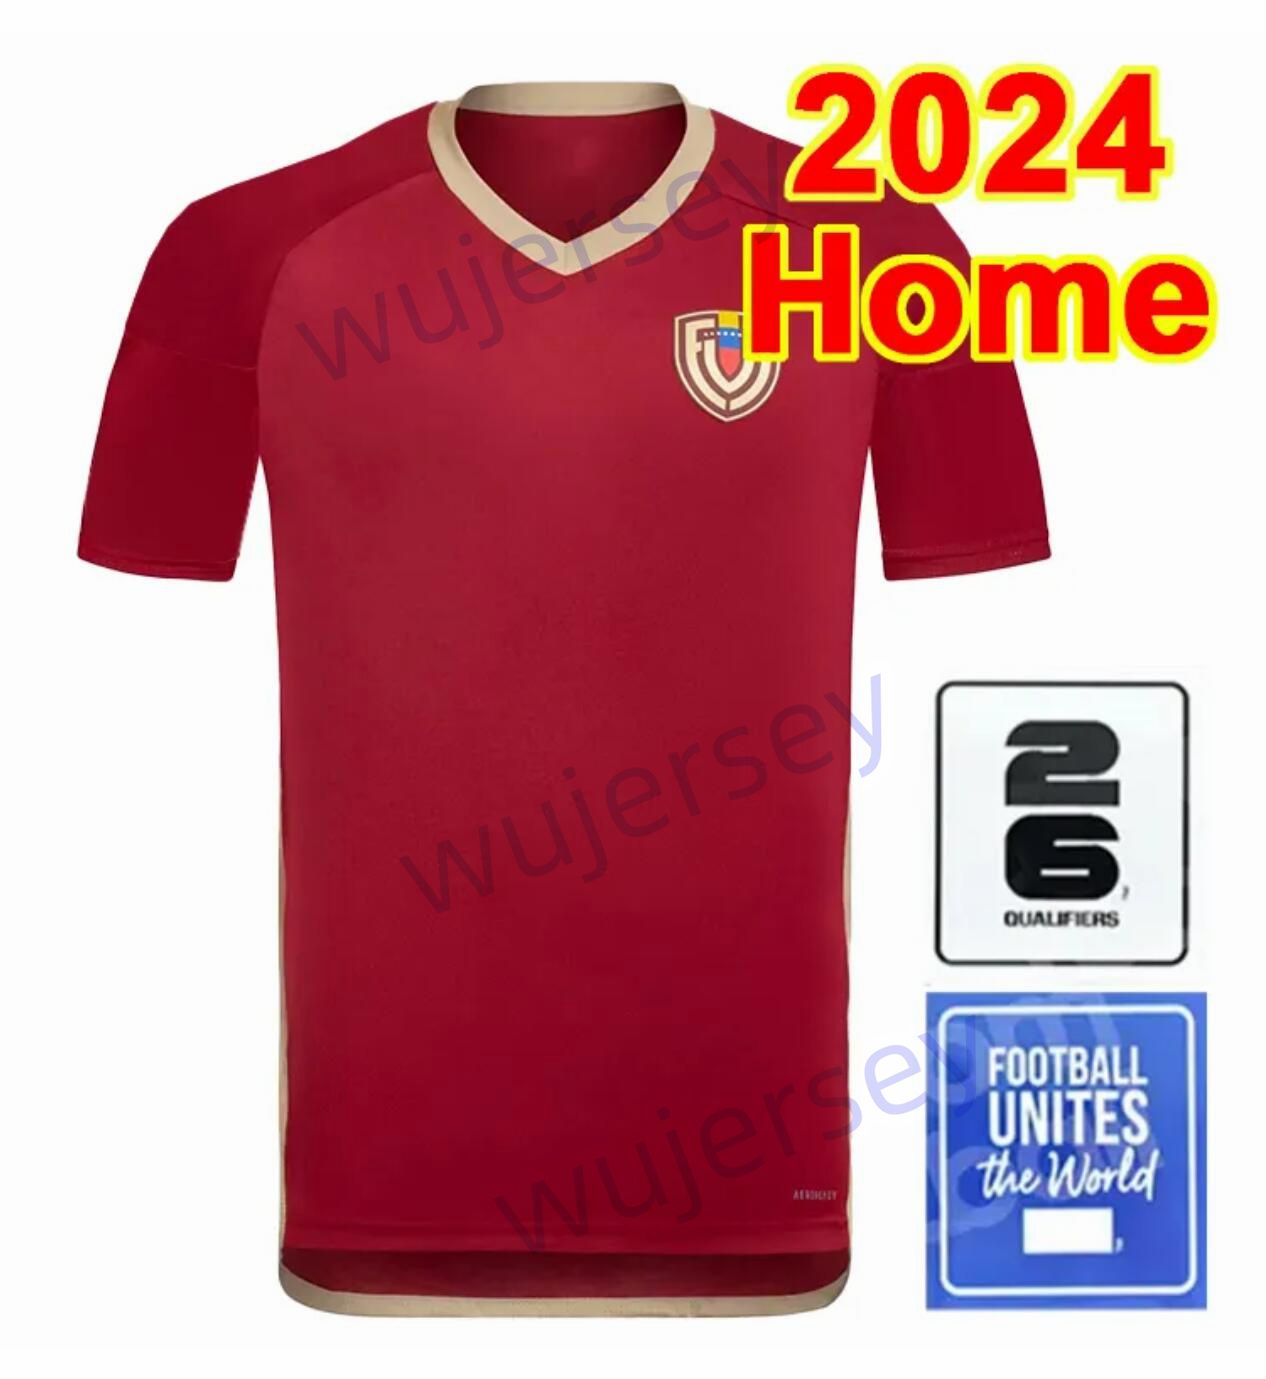 2024 home Adult patch 1